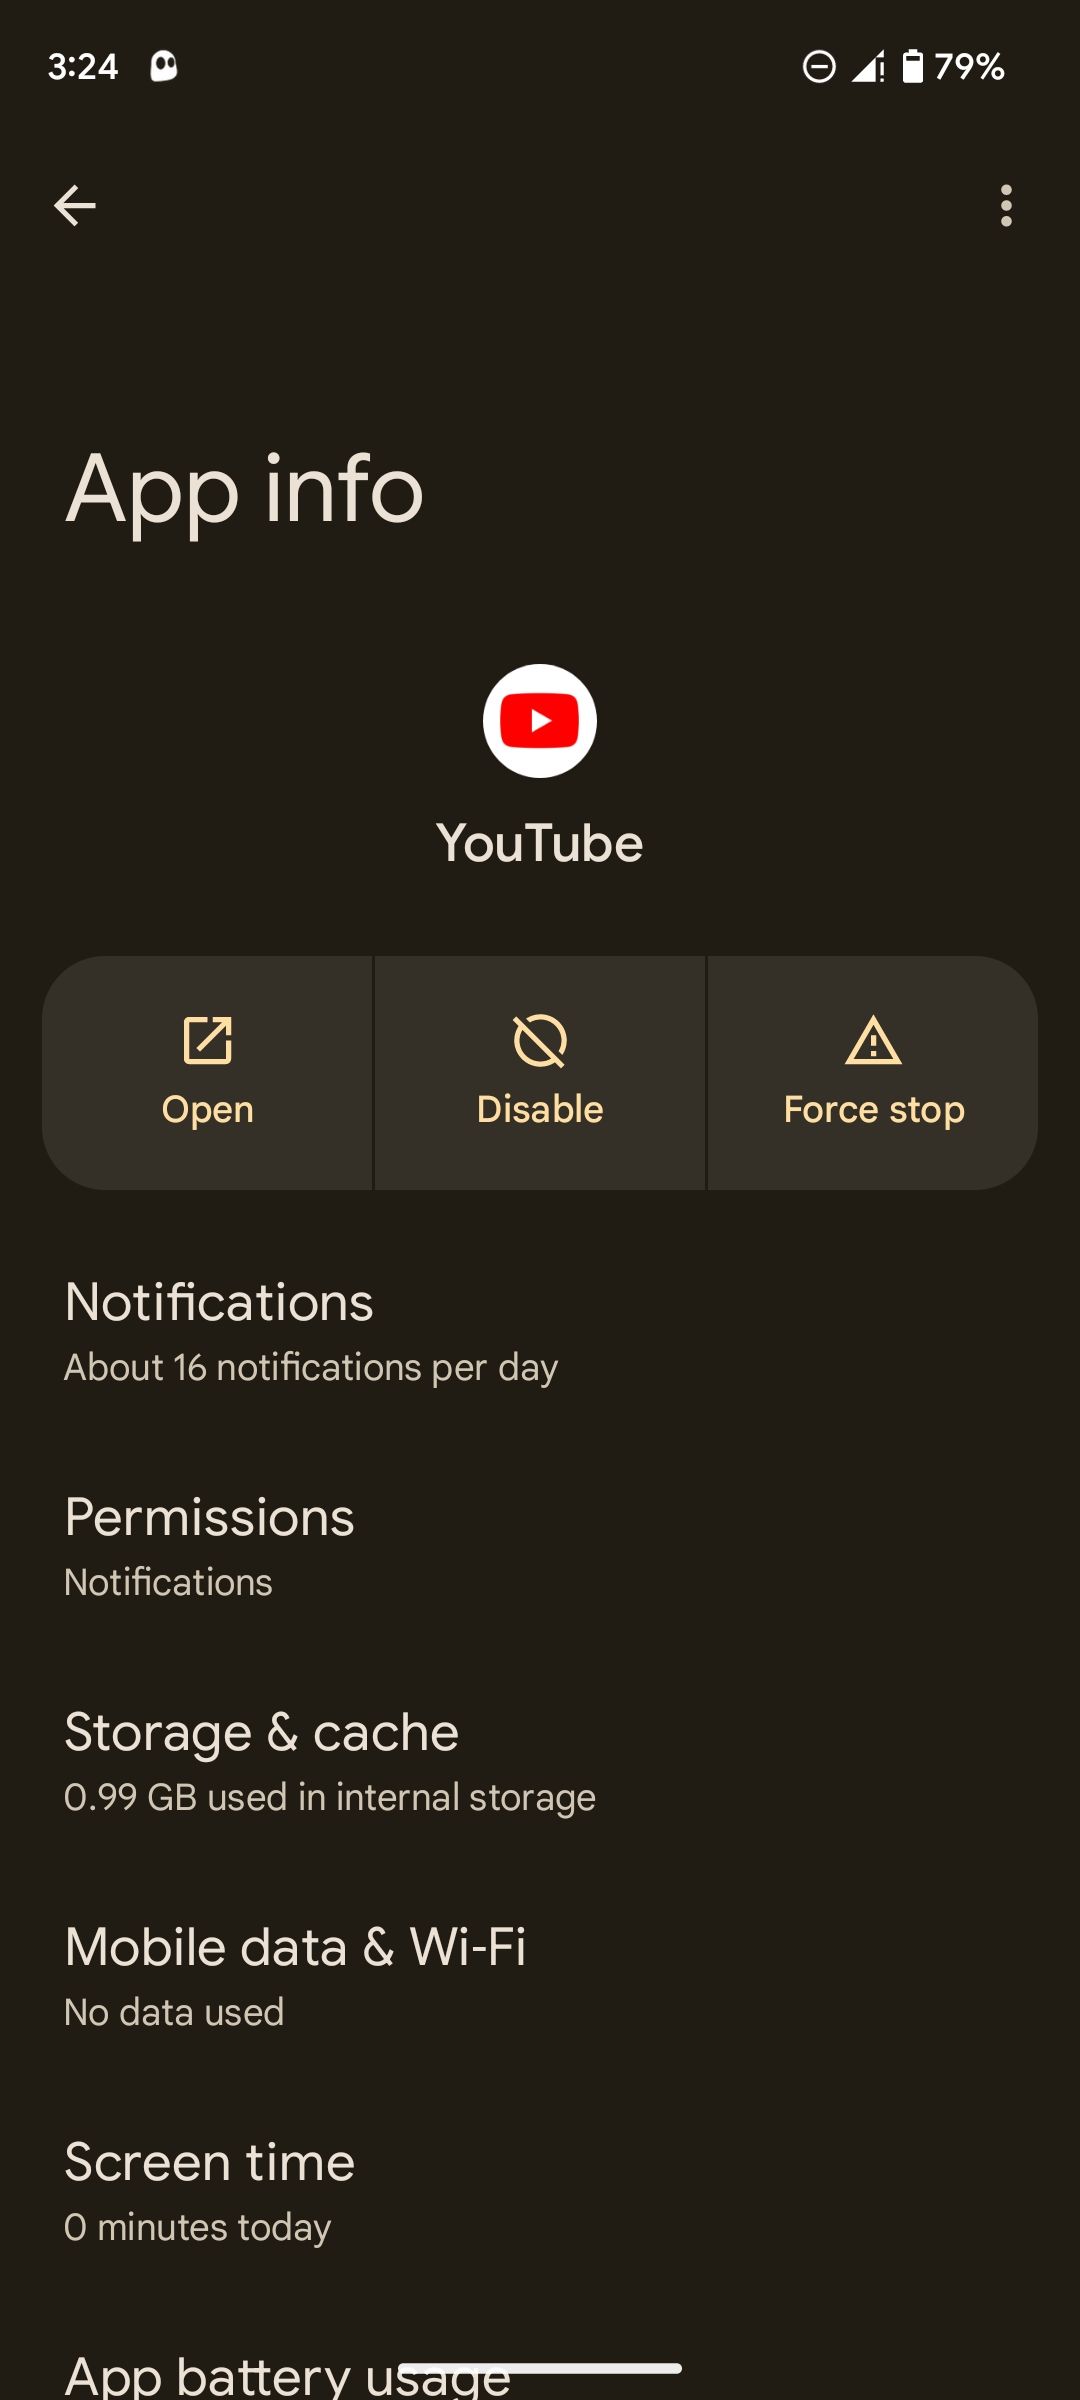 YouTube-App-Infoseite in Android